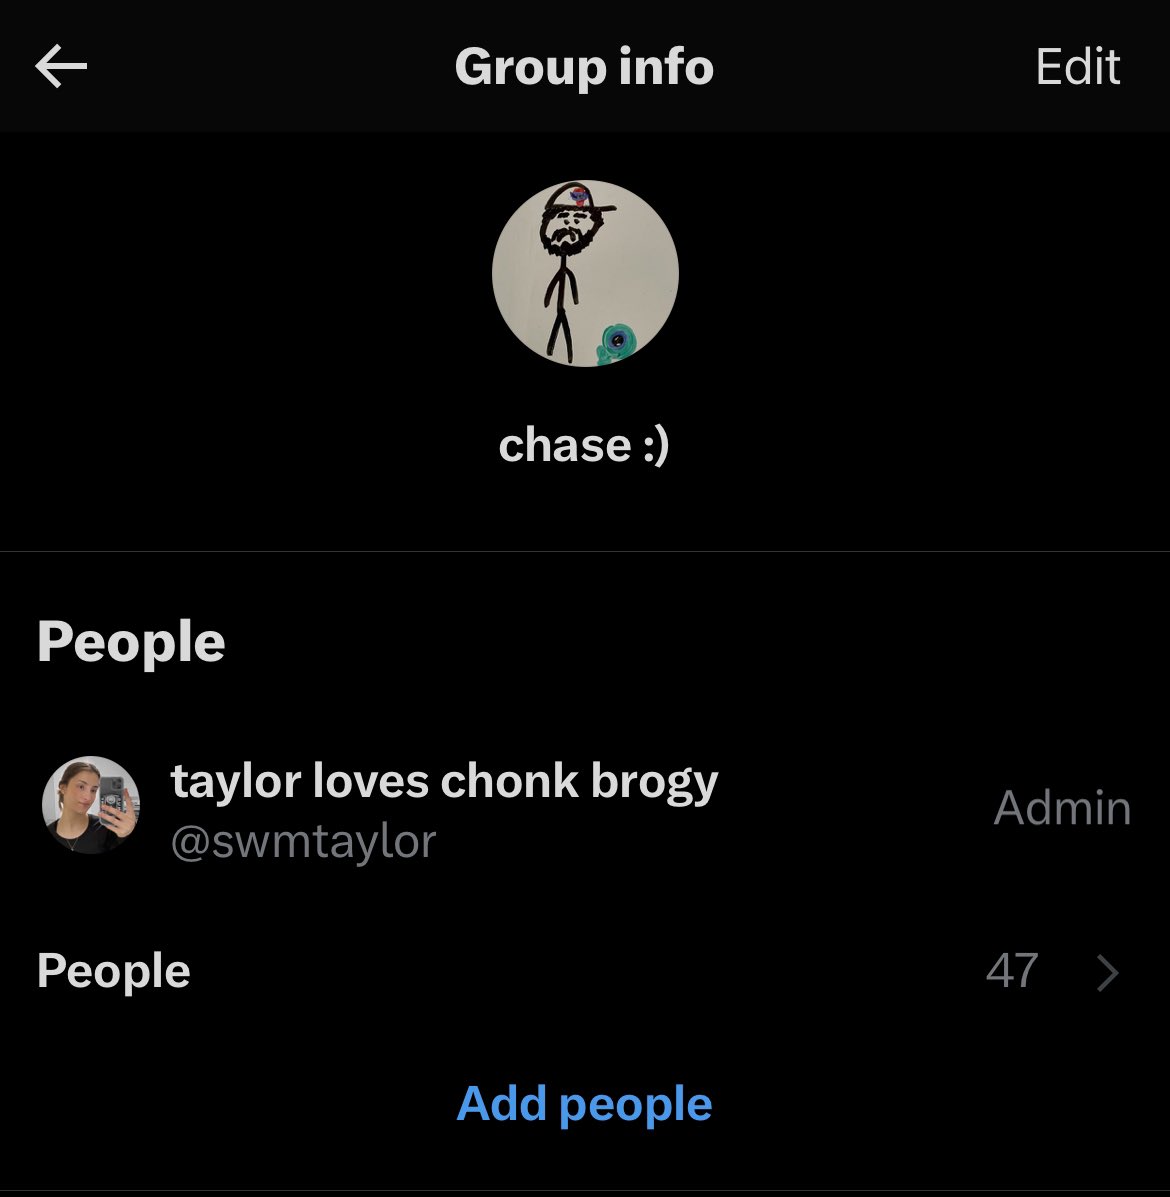 haven’t done this in a while-

i created a huge jsetwt gc over 2 years ago but i know there are a lot of new people on jsetwt now so reply if you want to be added and make sure your dm settings allow me to add you!